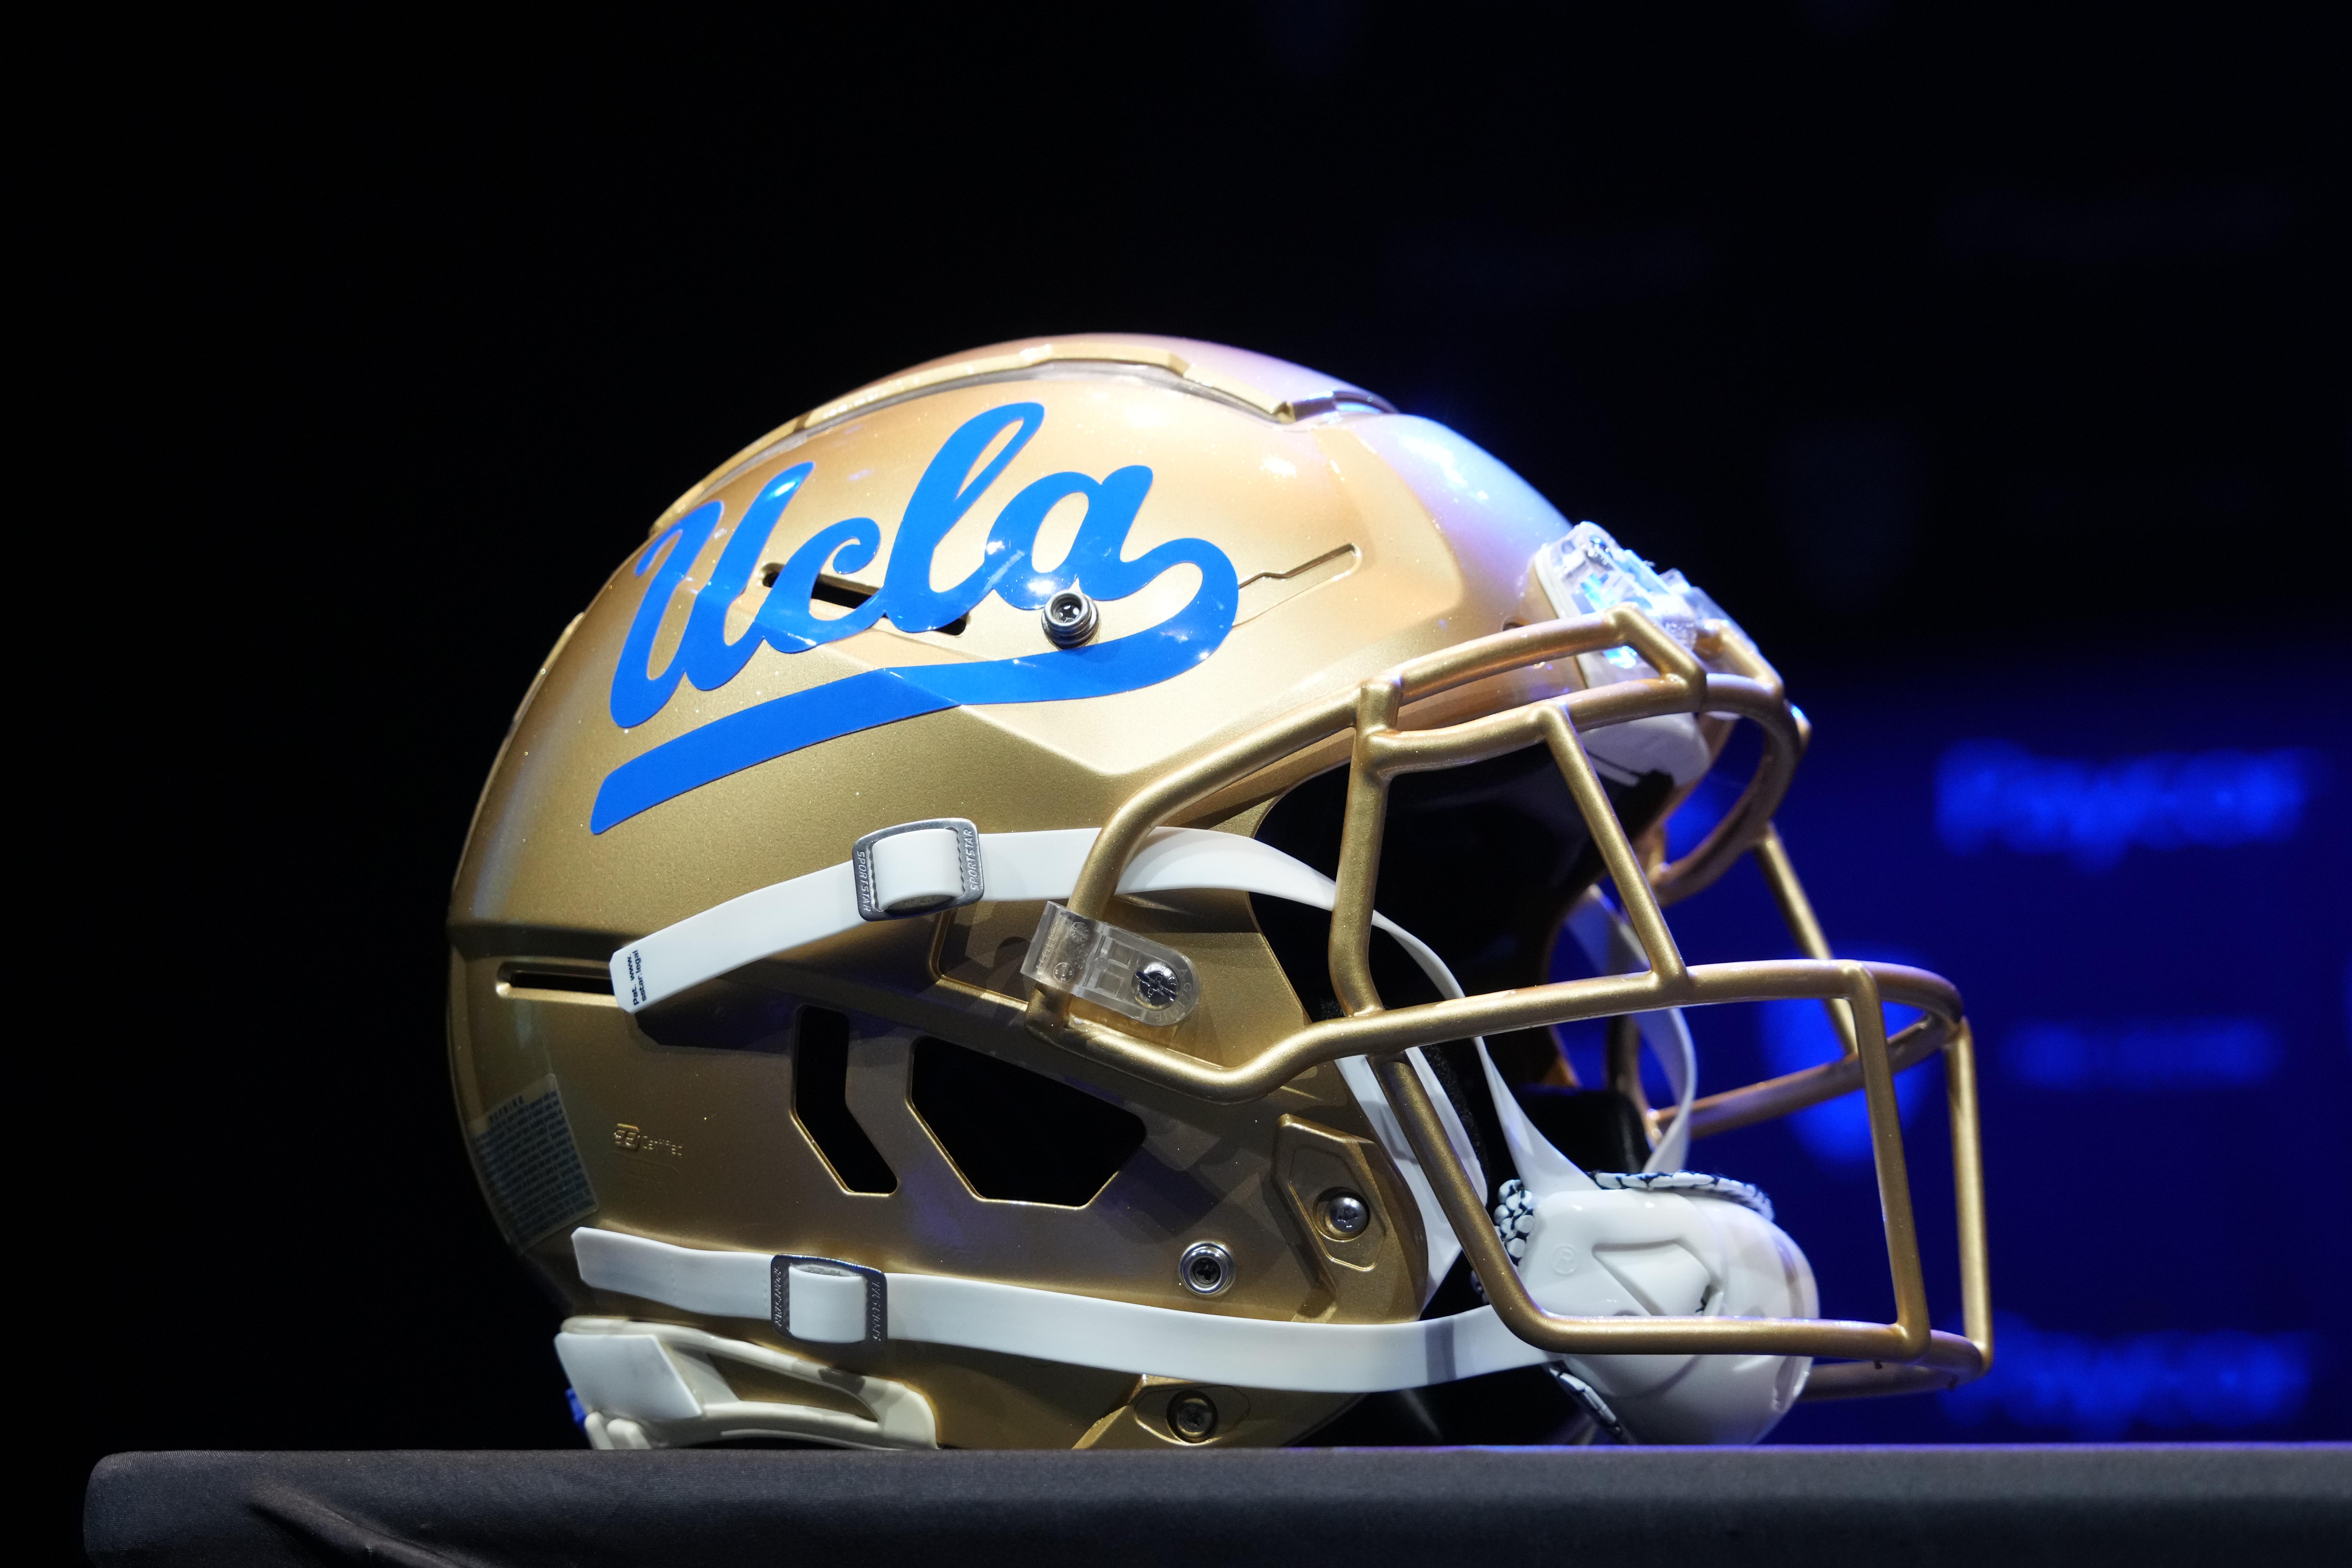 UCLA Bruins Game Today: TV Schedule, Channel, And More